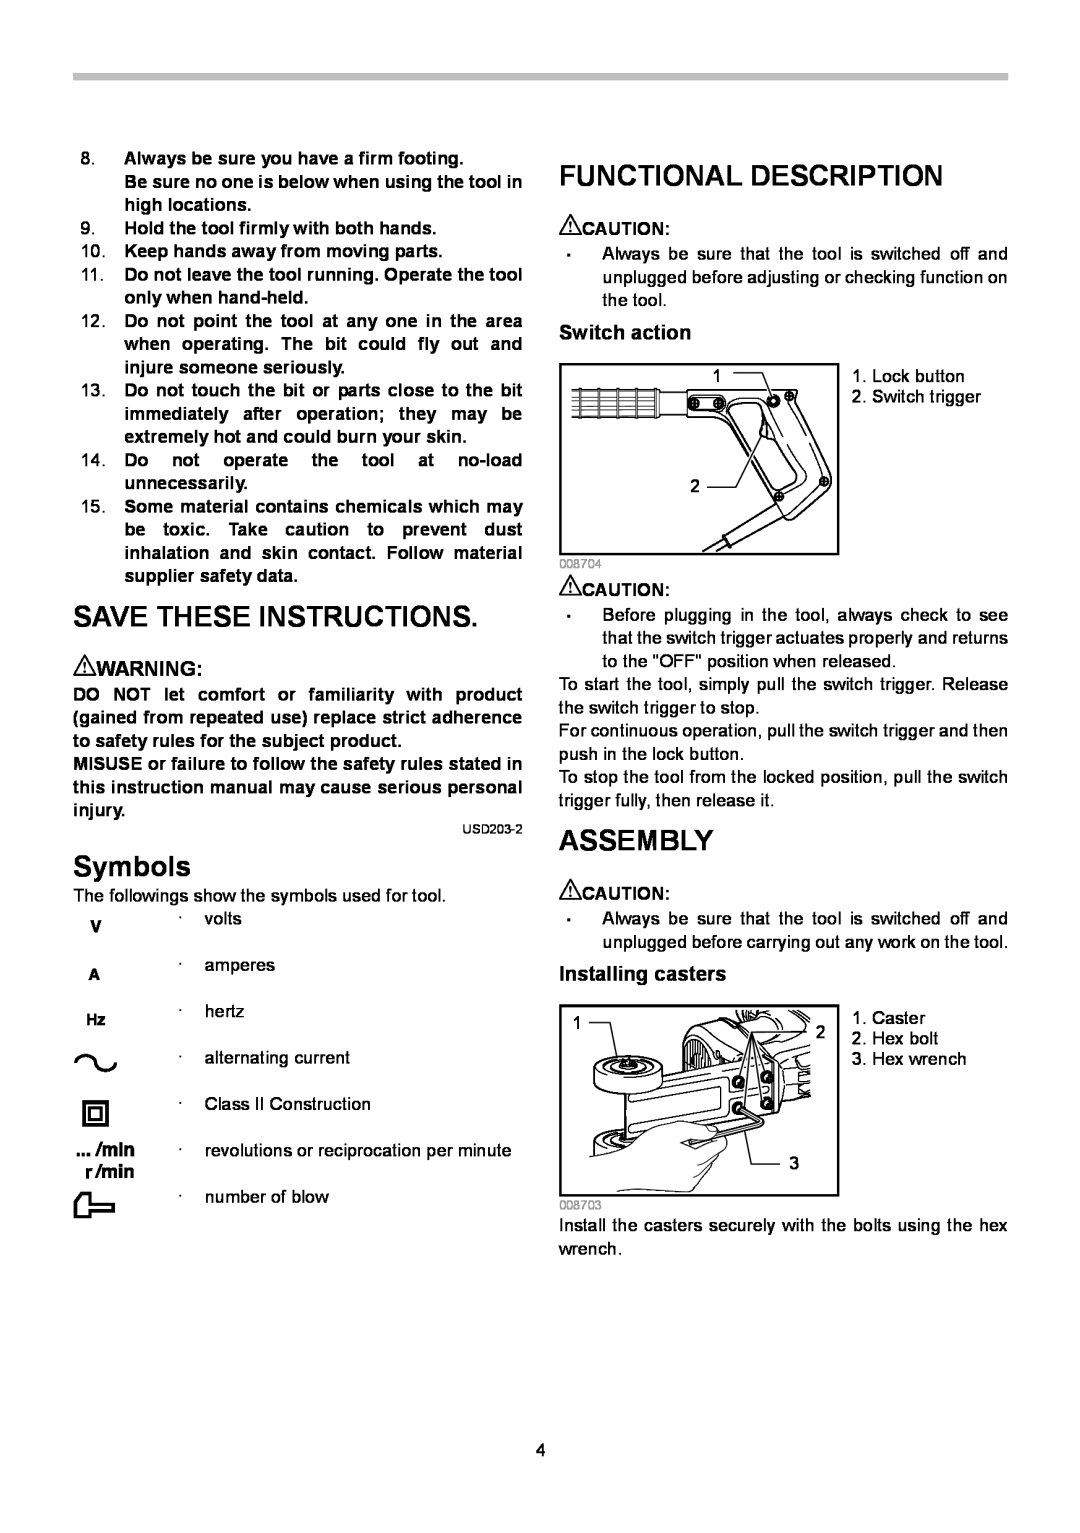 Makita HK1820L Functional Description, Save These Instructions, Symbols, Assembly, Switch action, Installing casters 